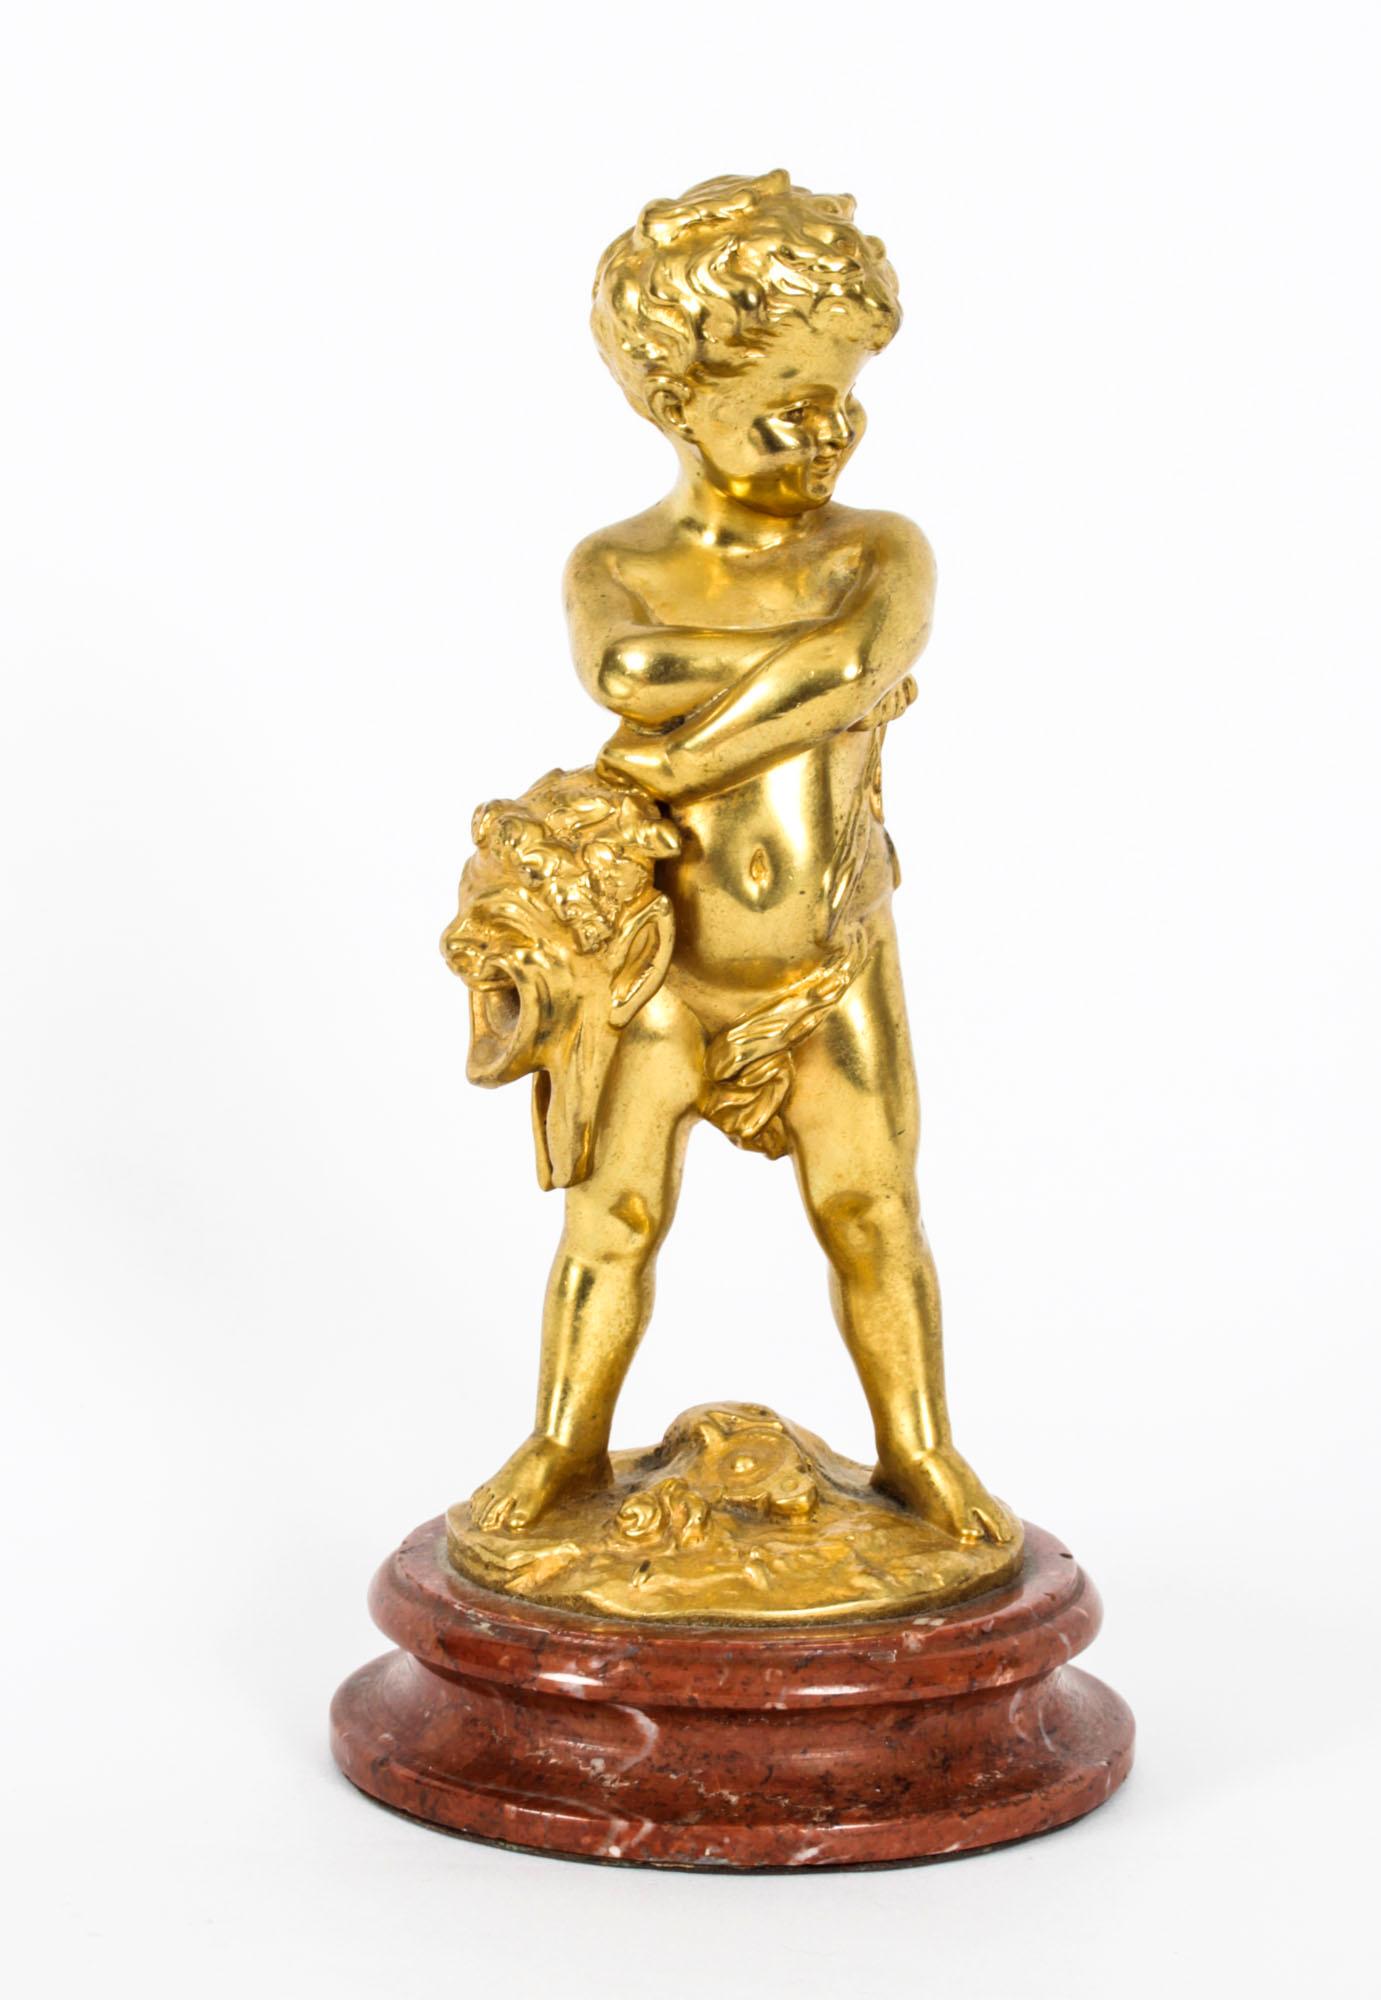 A magnificent antique pair of French gilt bronze figures of cherubs by the renowned French Sculpter Louis Kley (1833-1911), Circa 1860 in date.

They are superbly sculptured representing theatre, both are standing with arms crossed holding bearded